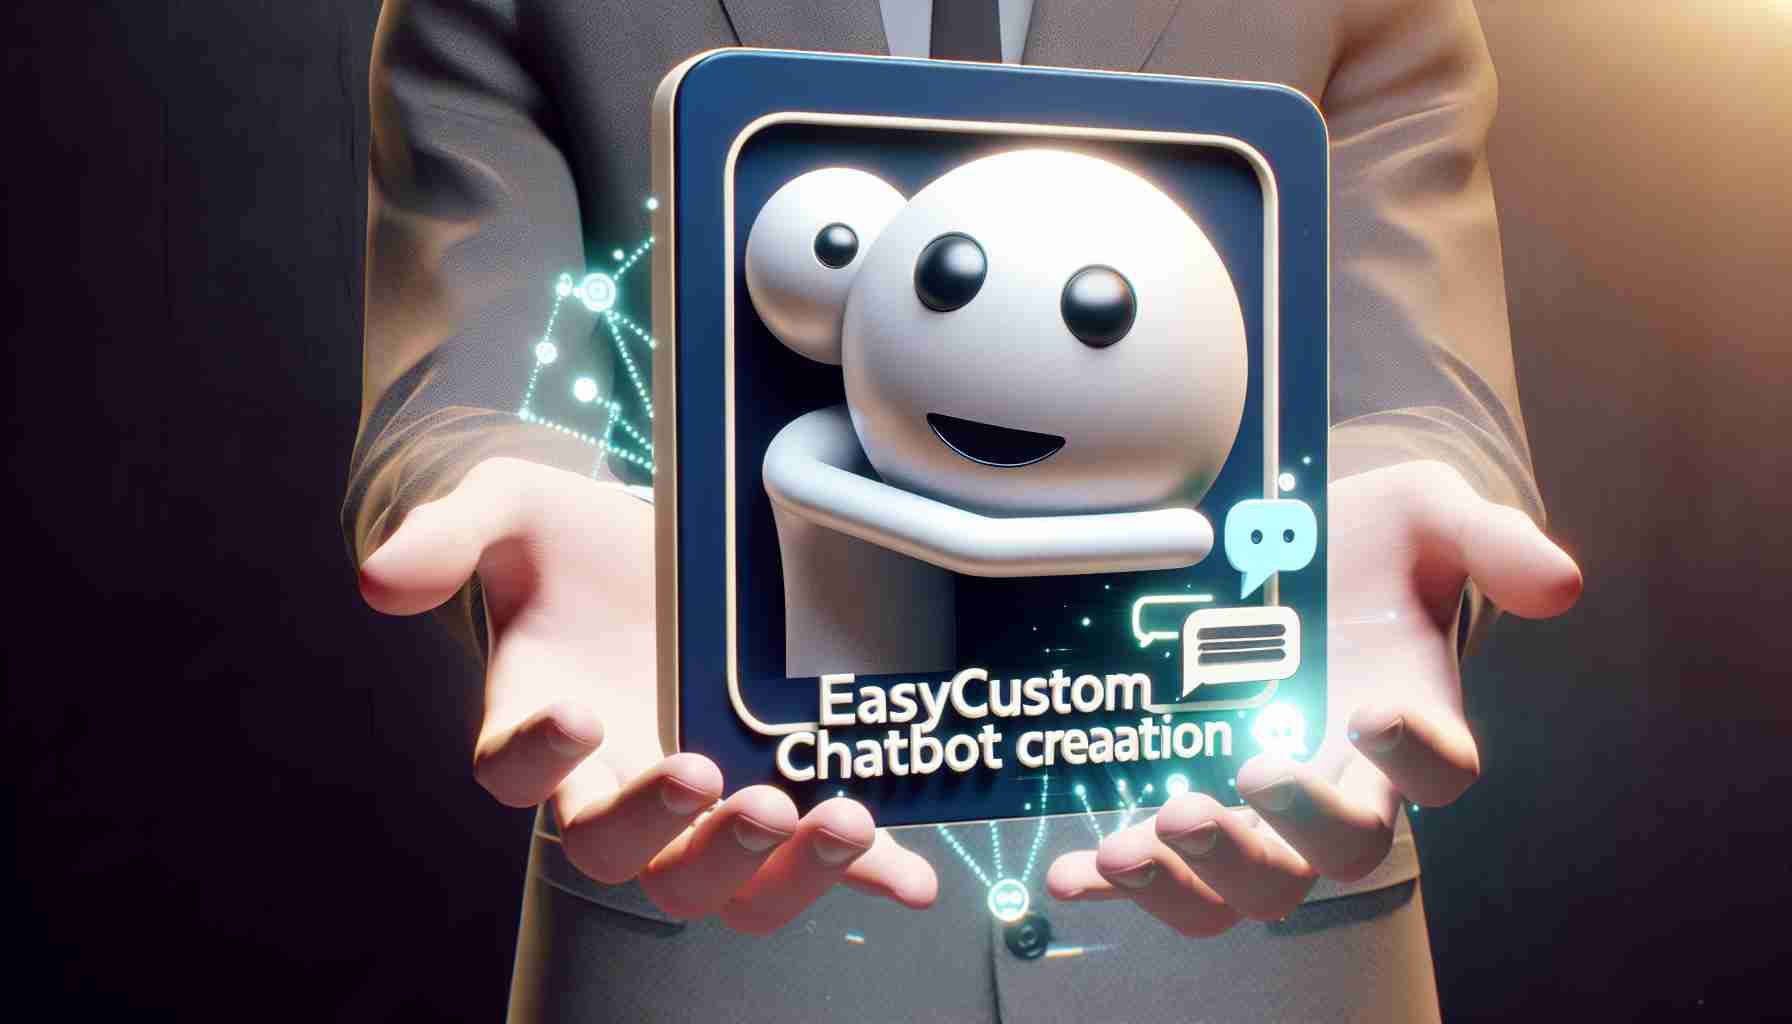 Hugging Face Introduces Easy Custom Chatbot Creation